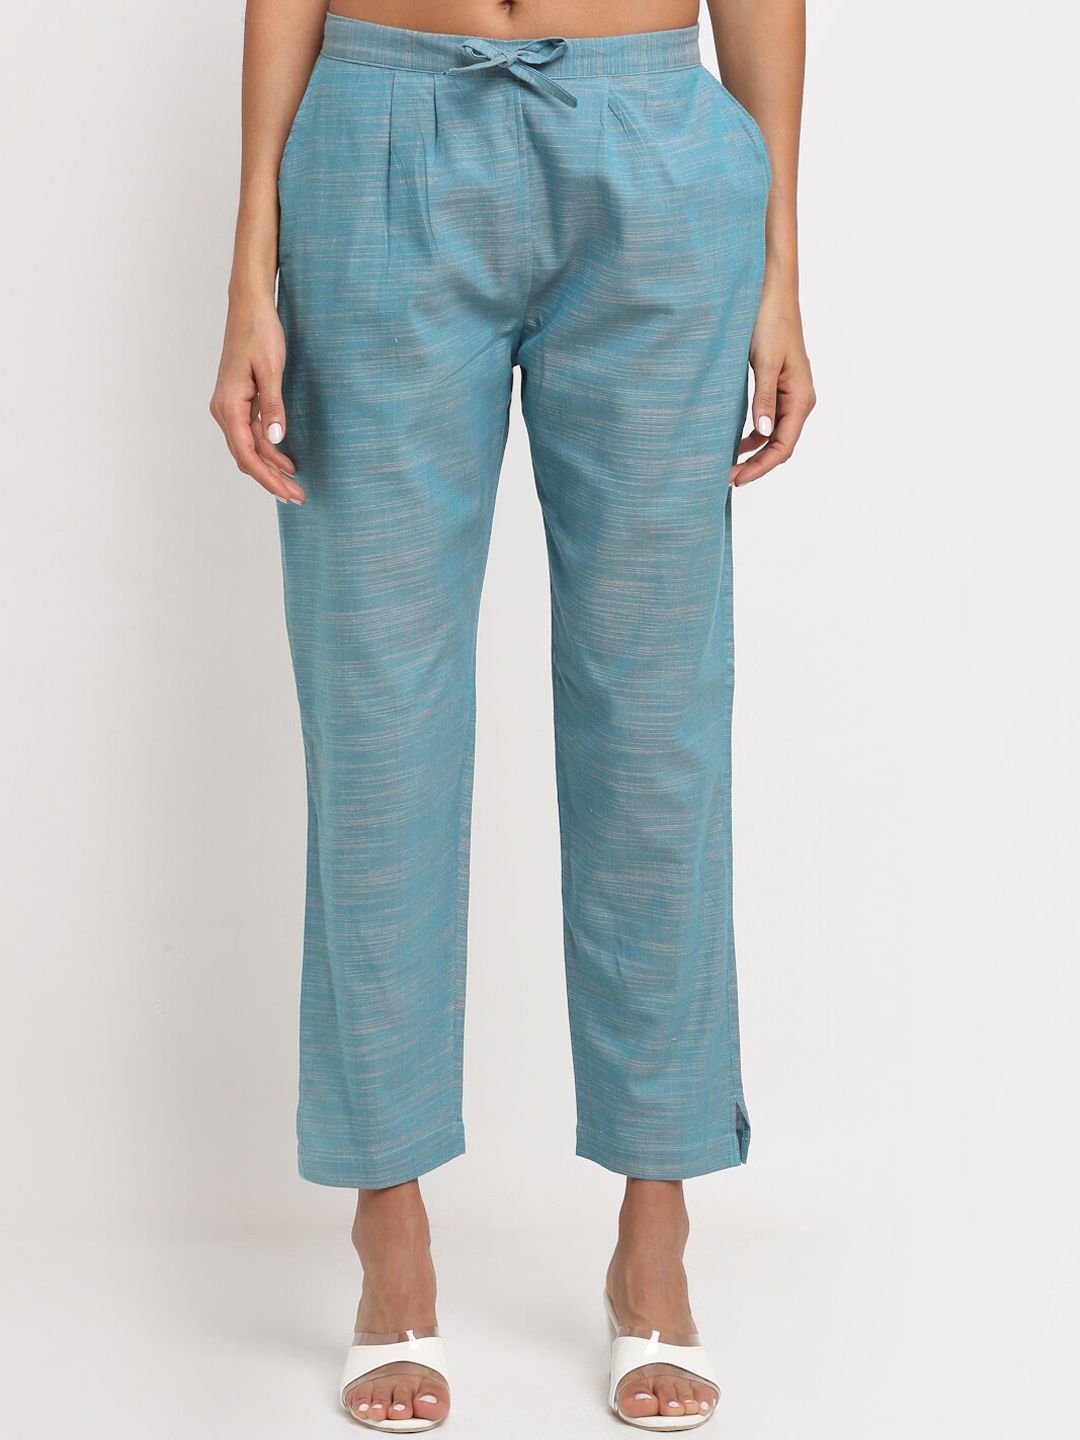 NEUDIS Women Turquoise Blue Pleated Cigerette Trousers Price in India